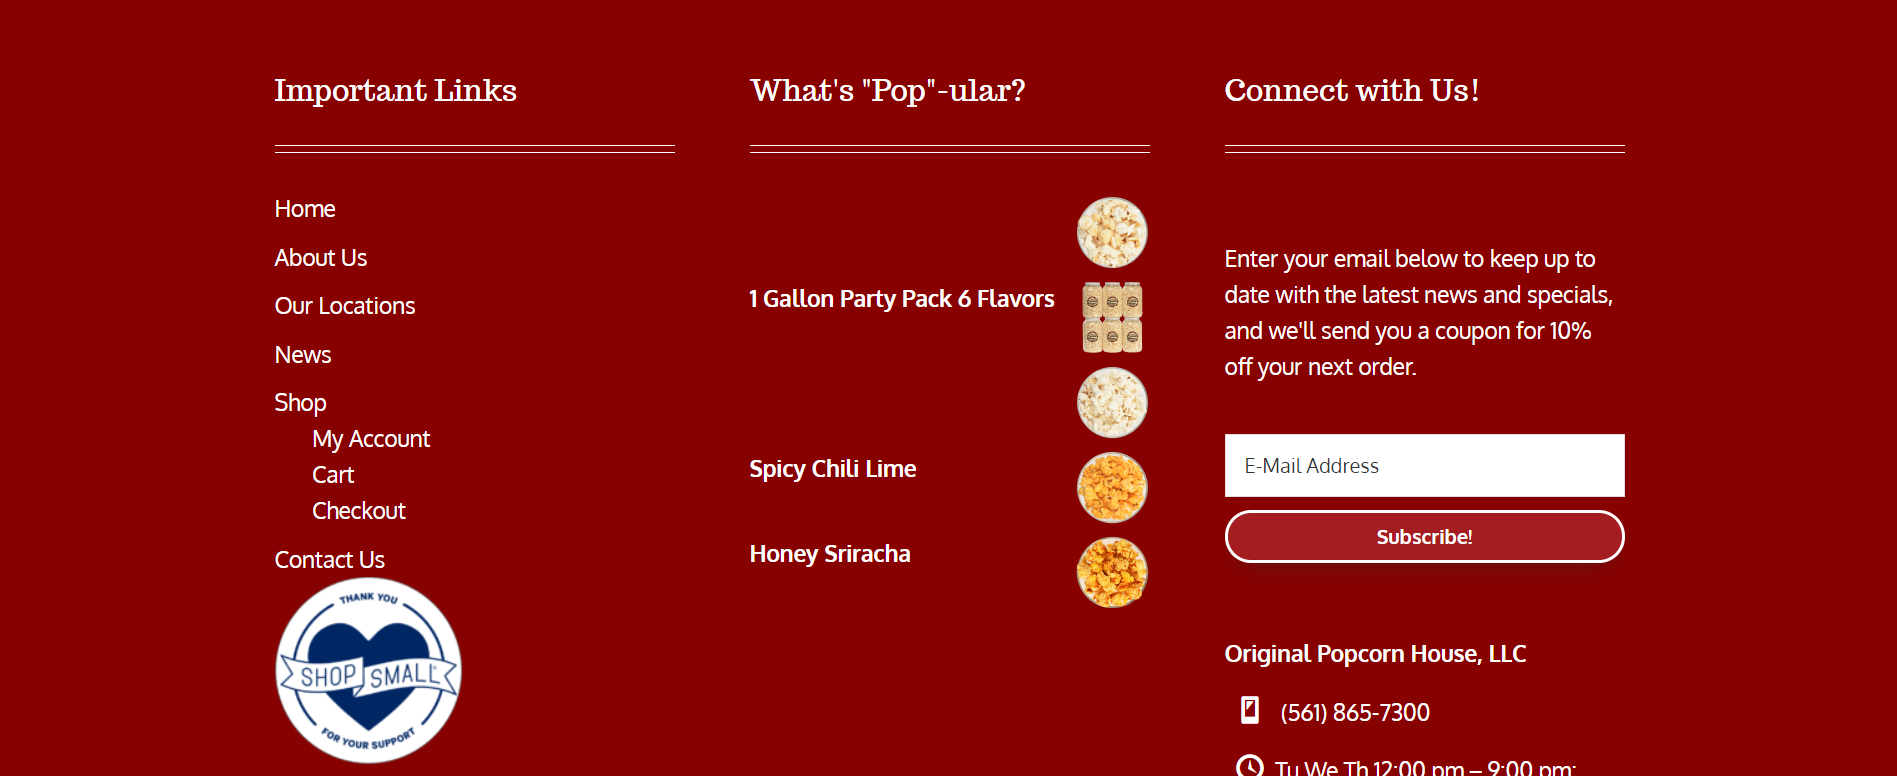 The Oiginal Popcorn House page lists their most popular flavors under a title reading "What's Pop-ular." The flavors are accompanied by images.